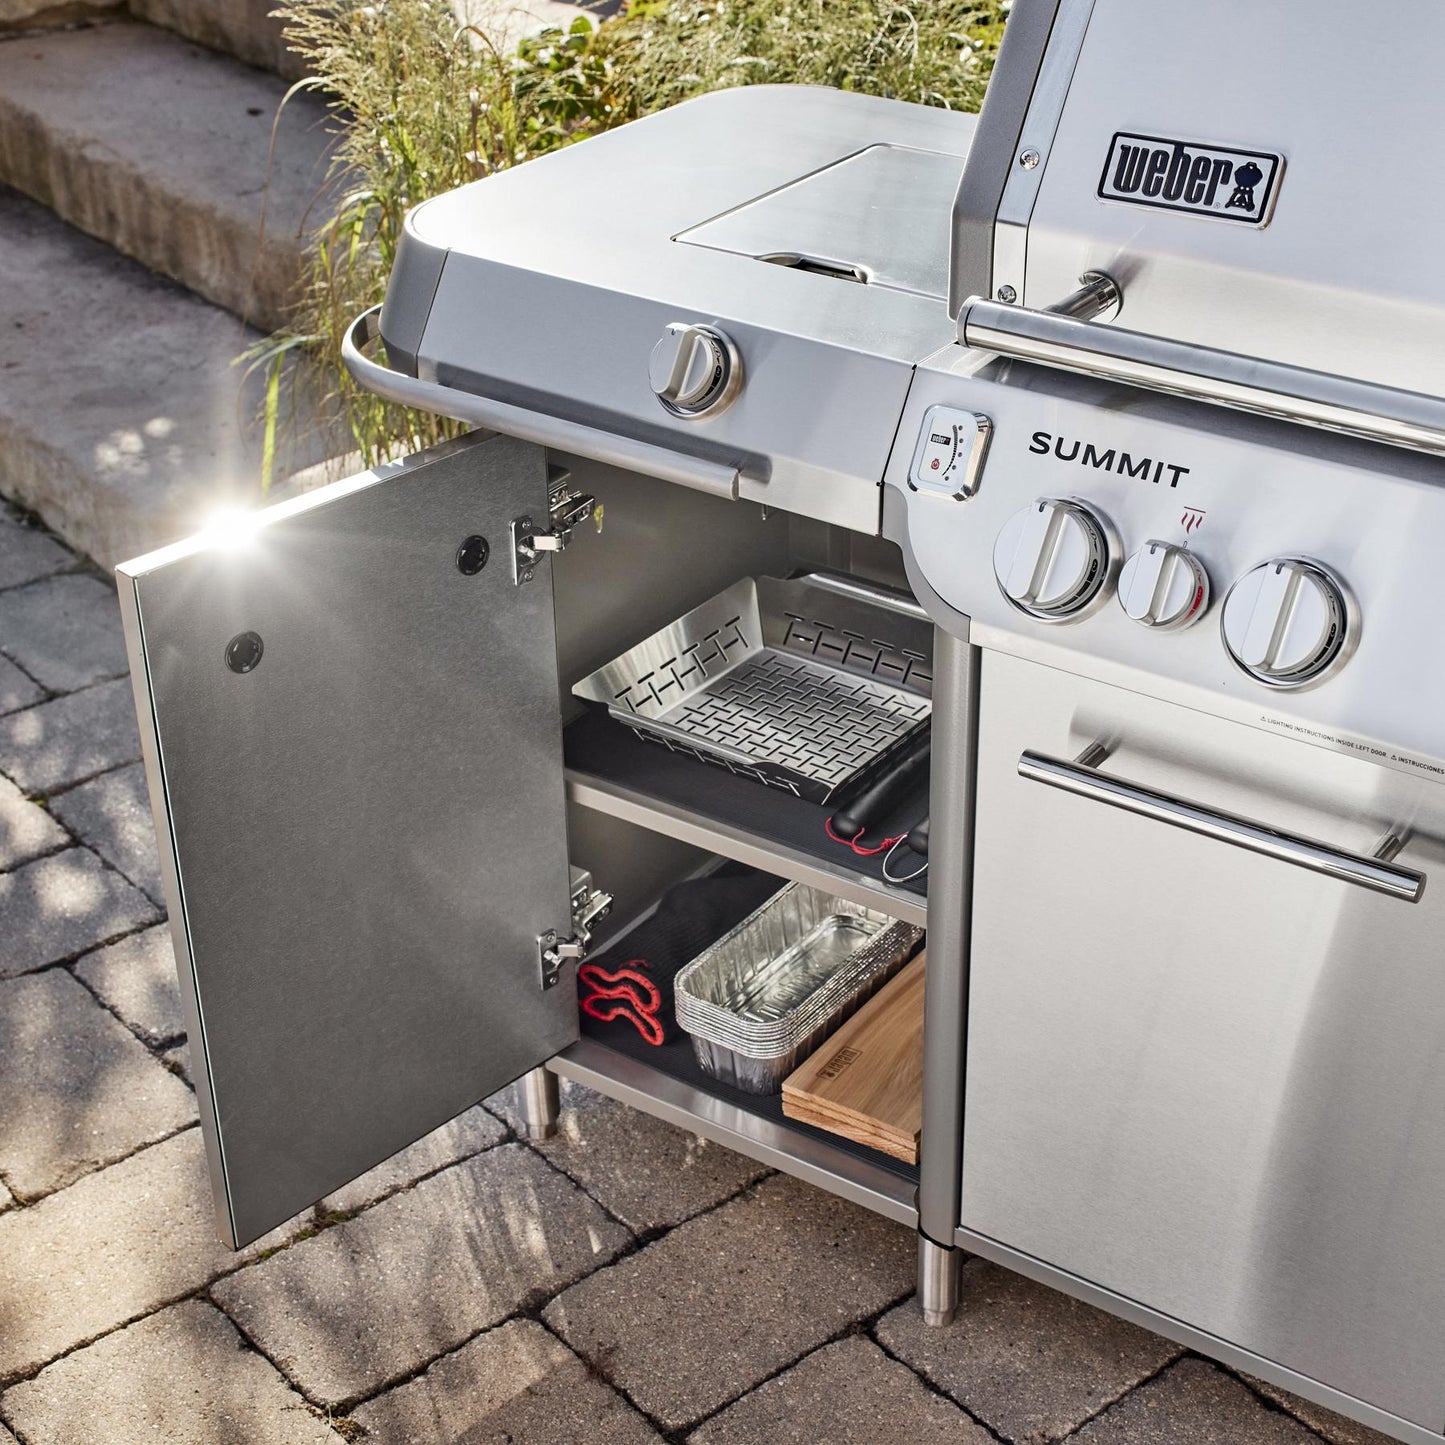 Weber 1500092 Summit® Gc38 S Grill Center (Natural Gas) - Stainless Steel